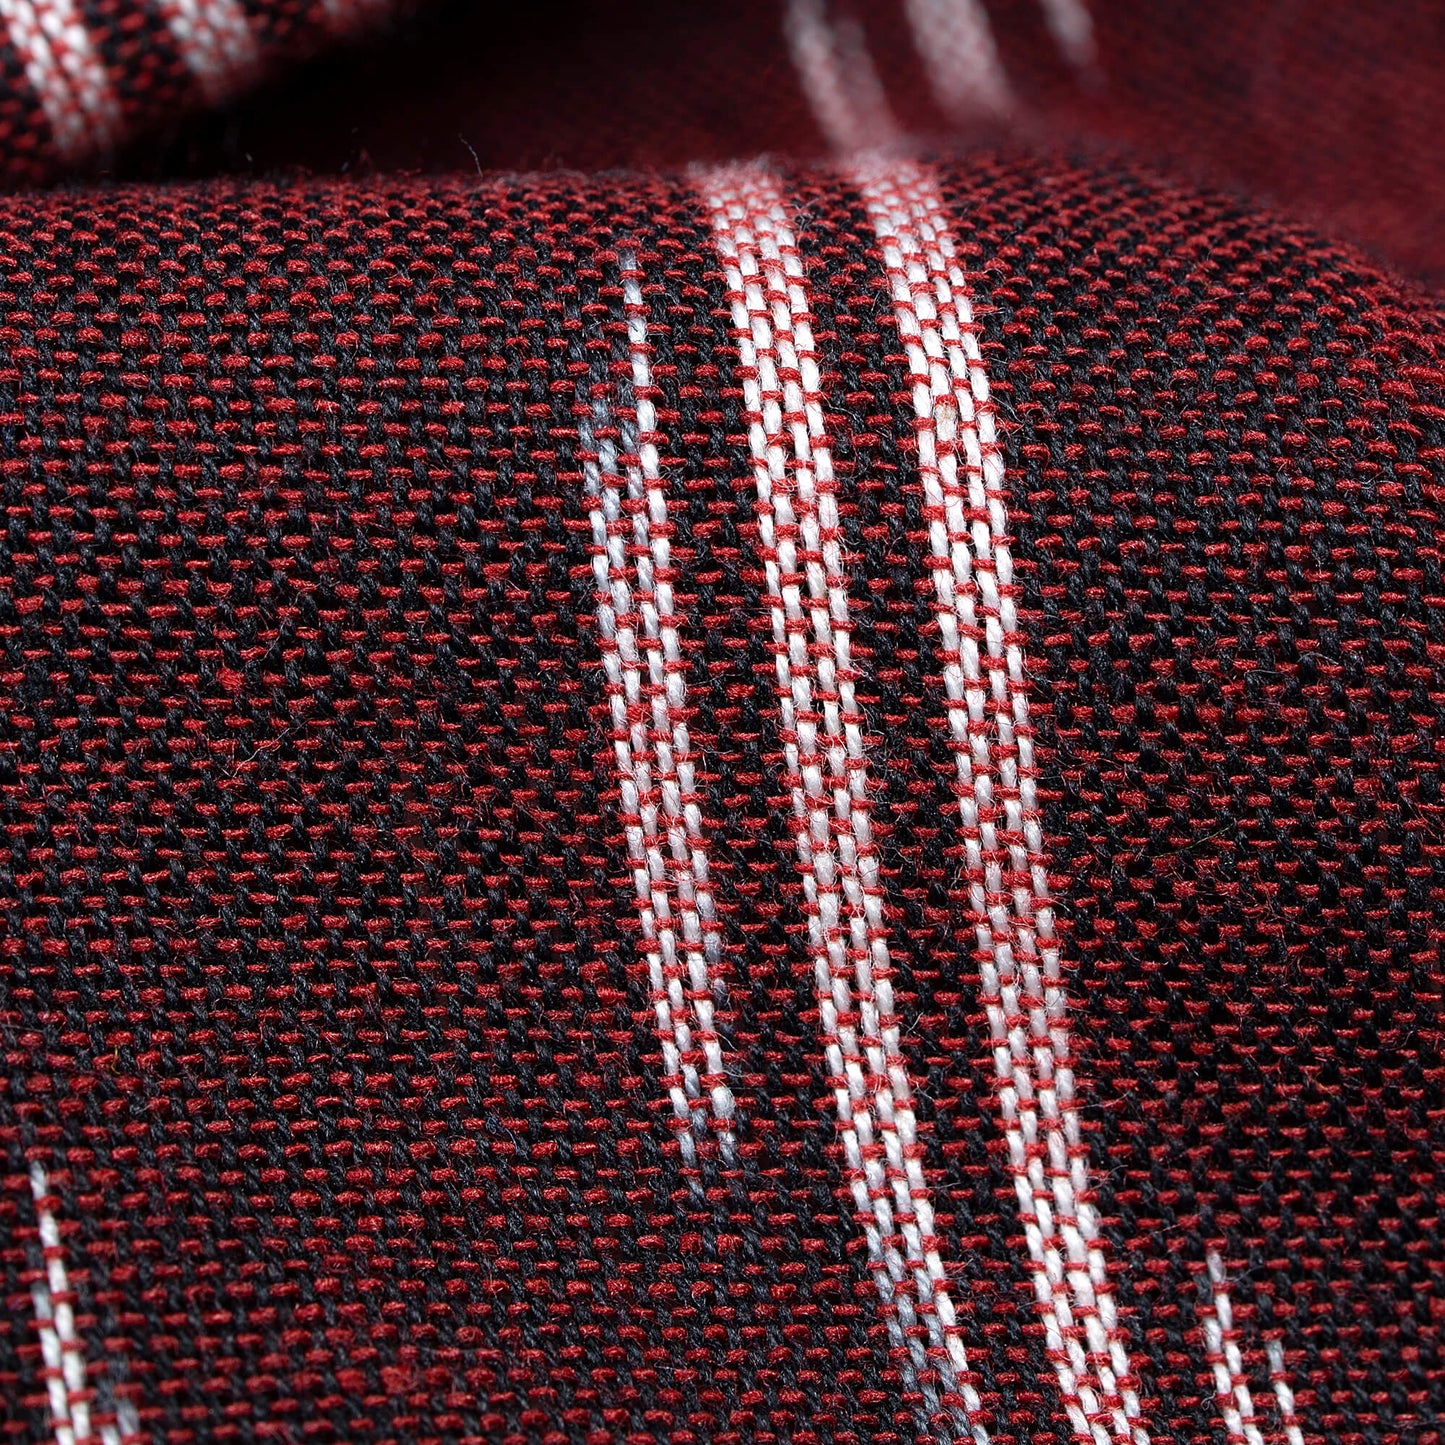 Blood Red Stripes Pattern Pre-Washed Ikat Cotton Fabric